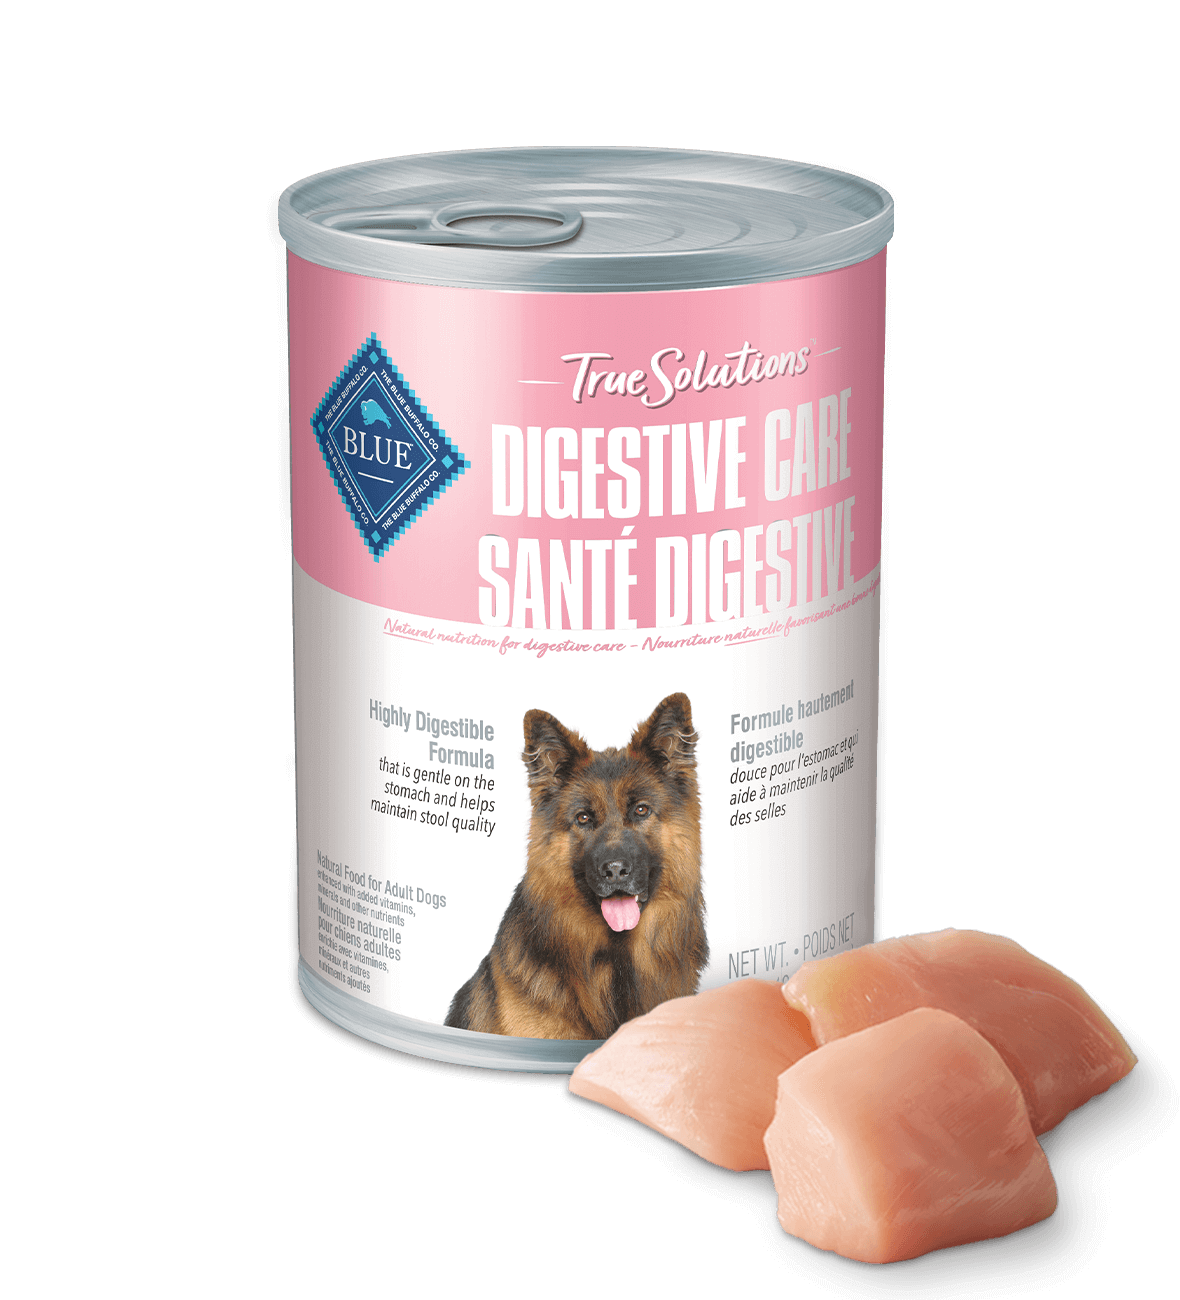 True Solutions Digestive Care canned dog food